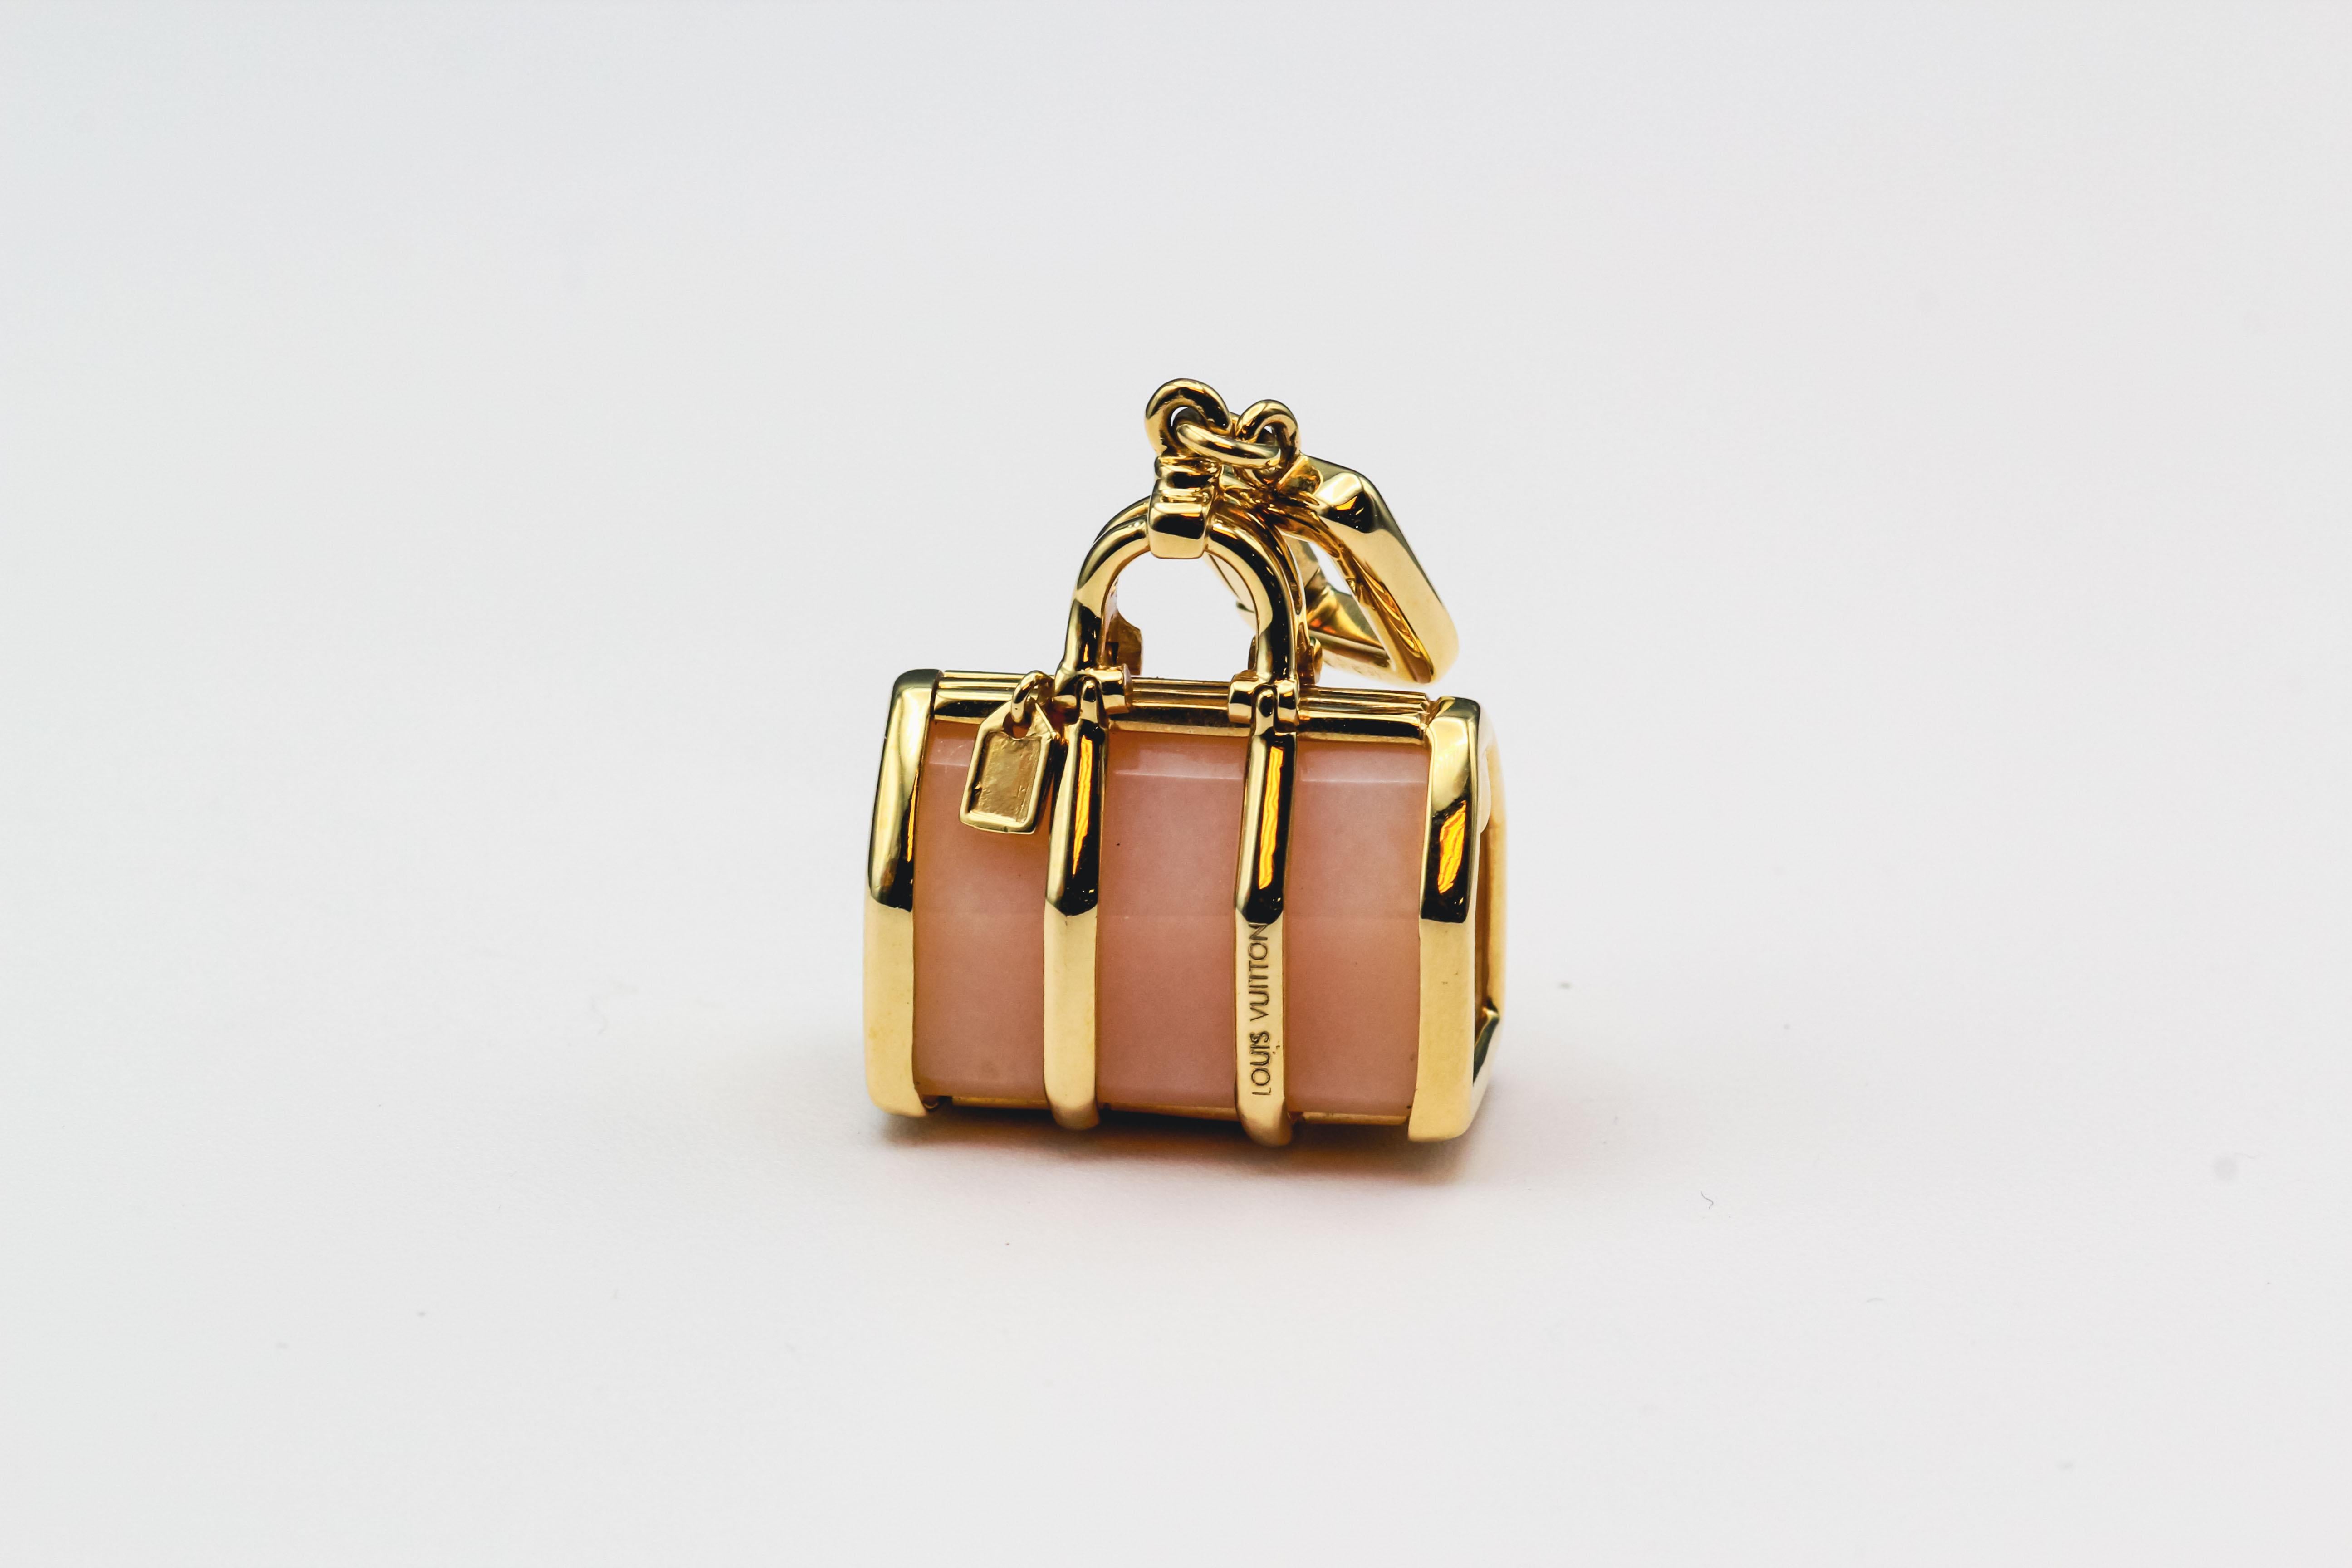 Fine 18K yellow gold and pink quartz bag/pendant charm by Louis Vuitton. It features a pink quartz body with 18k yellow gold hardware.  Well made and easy to add to any bracelet or worn as a pendant.

Hallmarks: Louis Vuitton, 750, reference